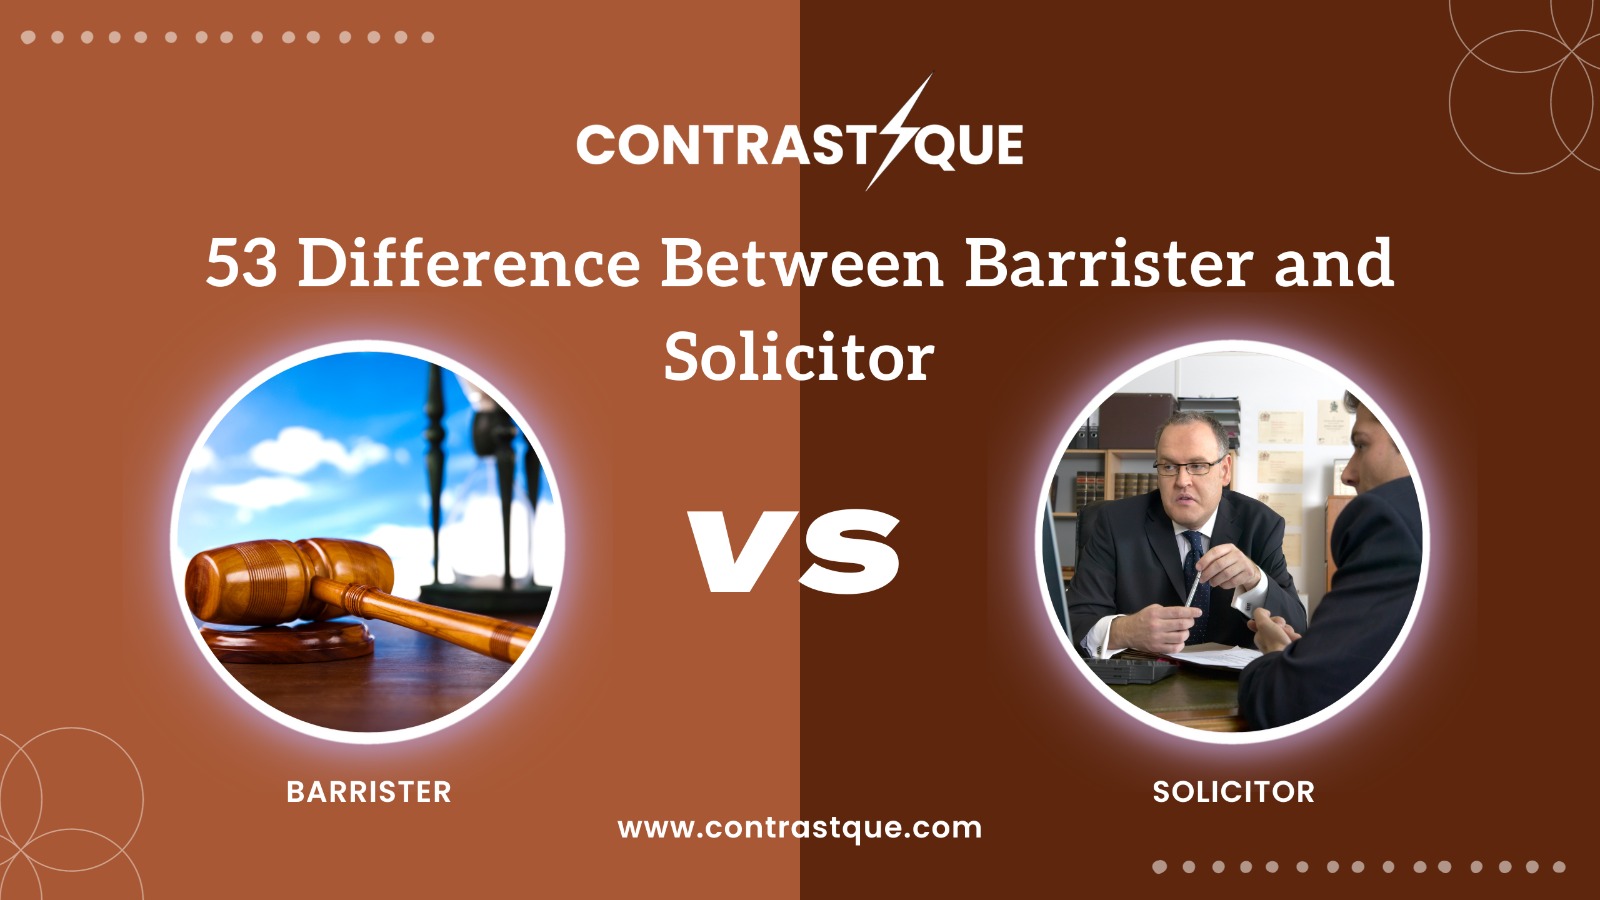 53 Difference Between Barrister and Solicitor